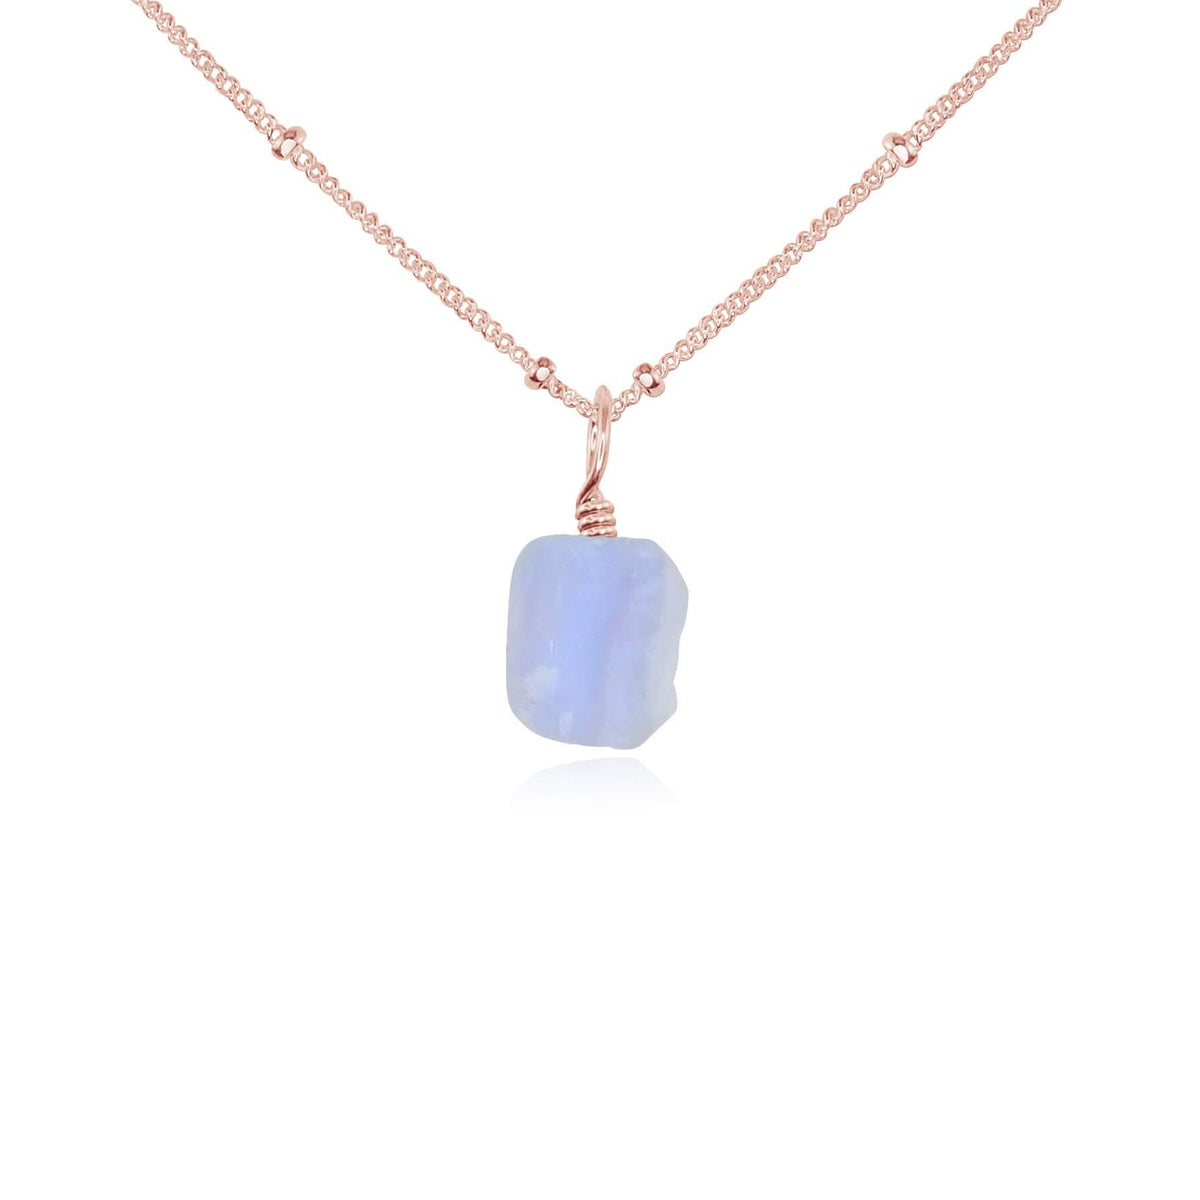 Raw Crystal Pendant Necklace - Blue Lace Agate - 14K Rose Gold Fill Satellite - Luna Tide Handmade Jewellery